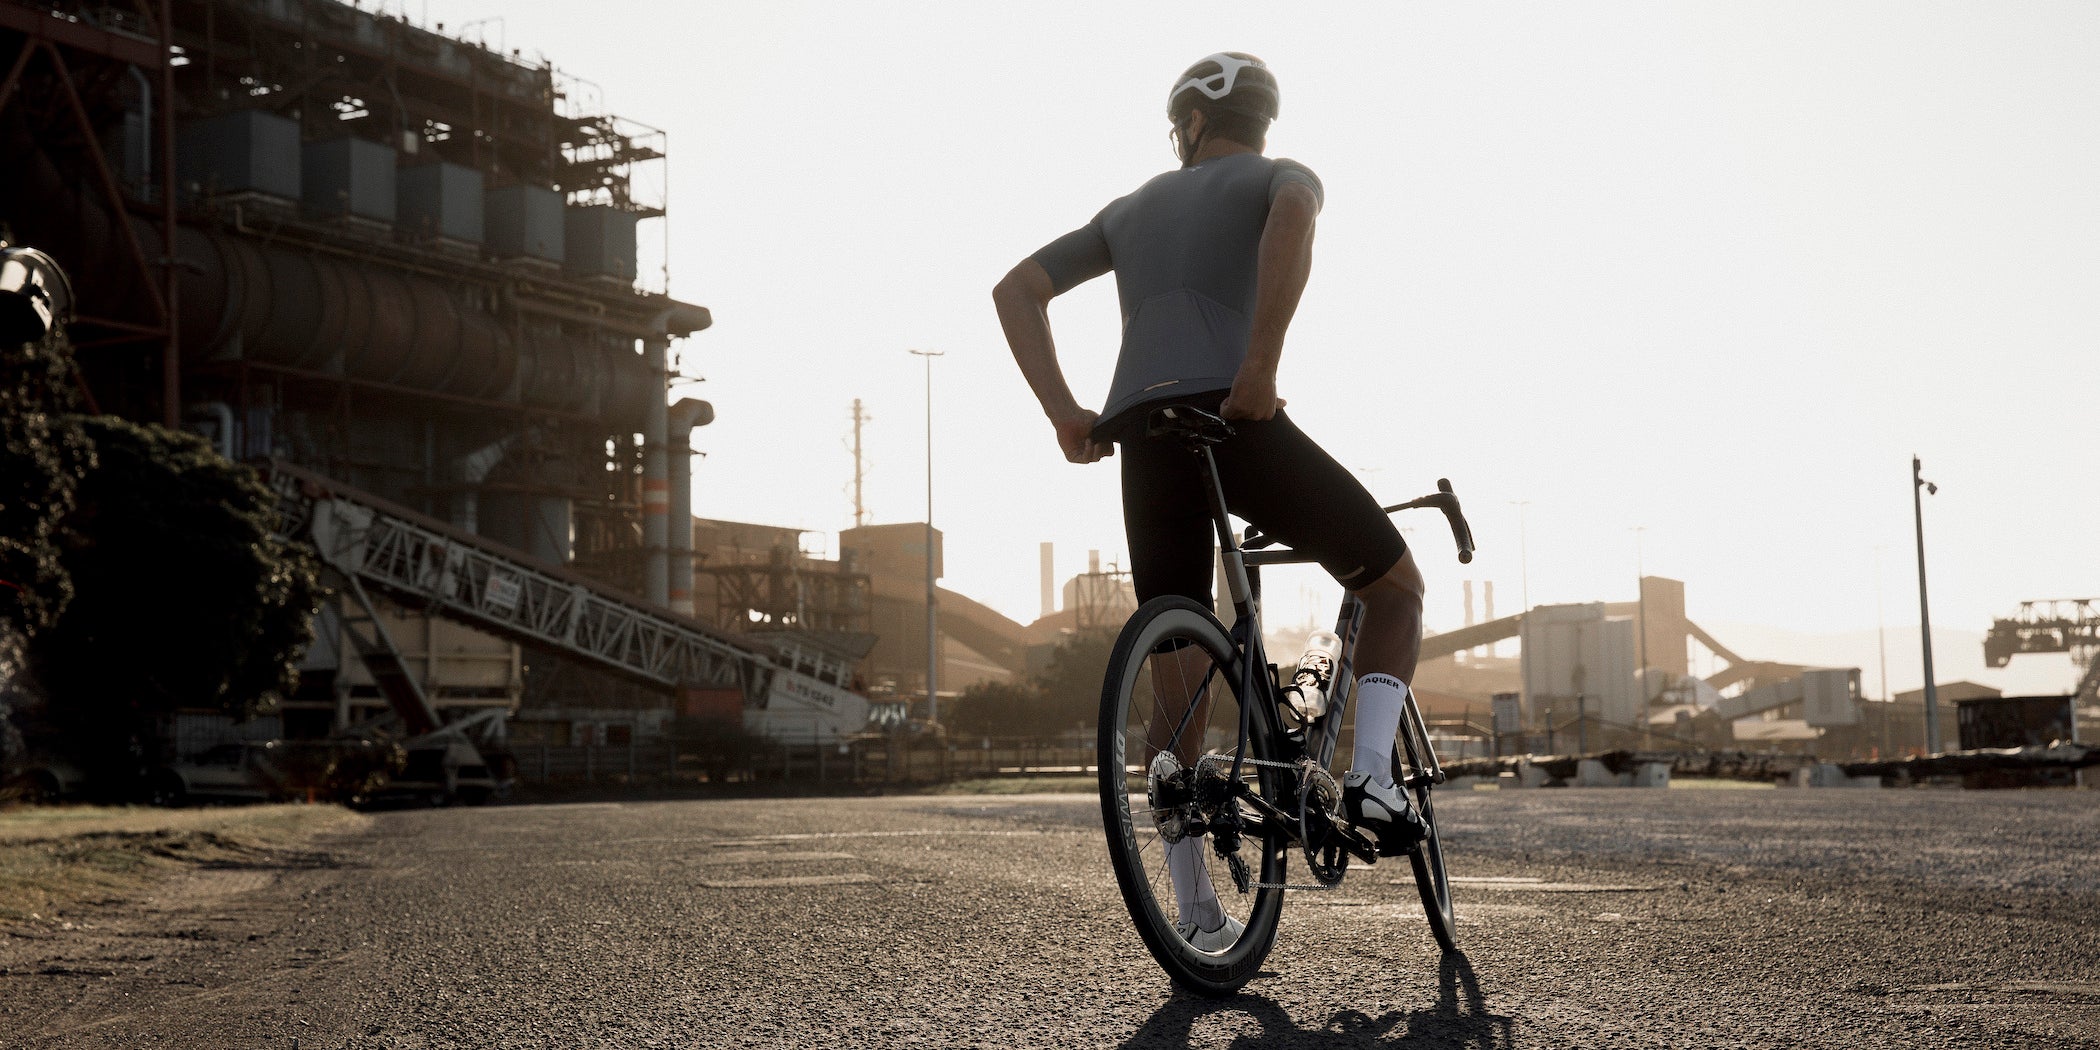 CYCLIST STANDING IN FRONT OF A GRAIN ELEVATOR WITH A BIKE ADJUSTING HIS JERSEY